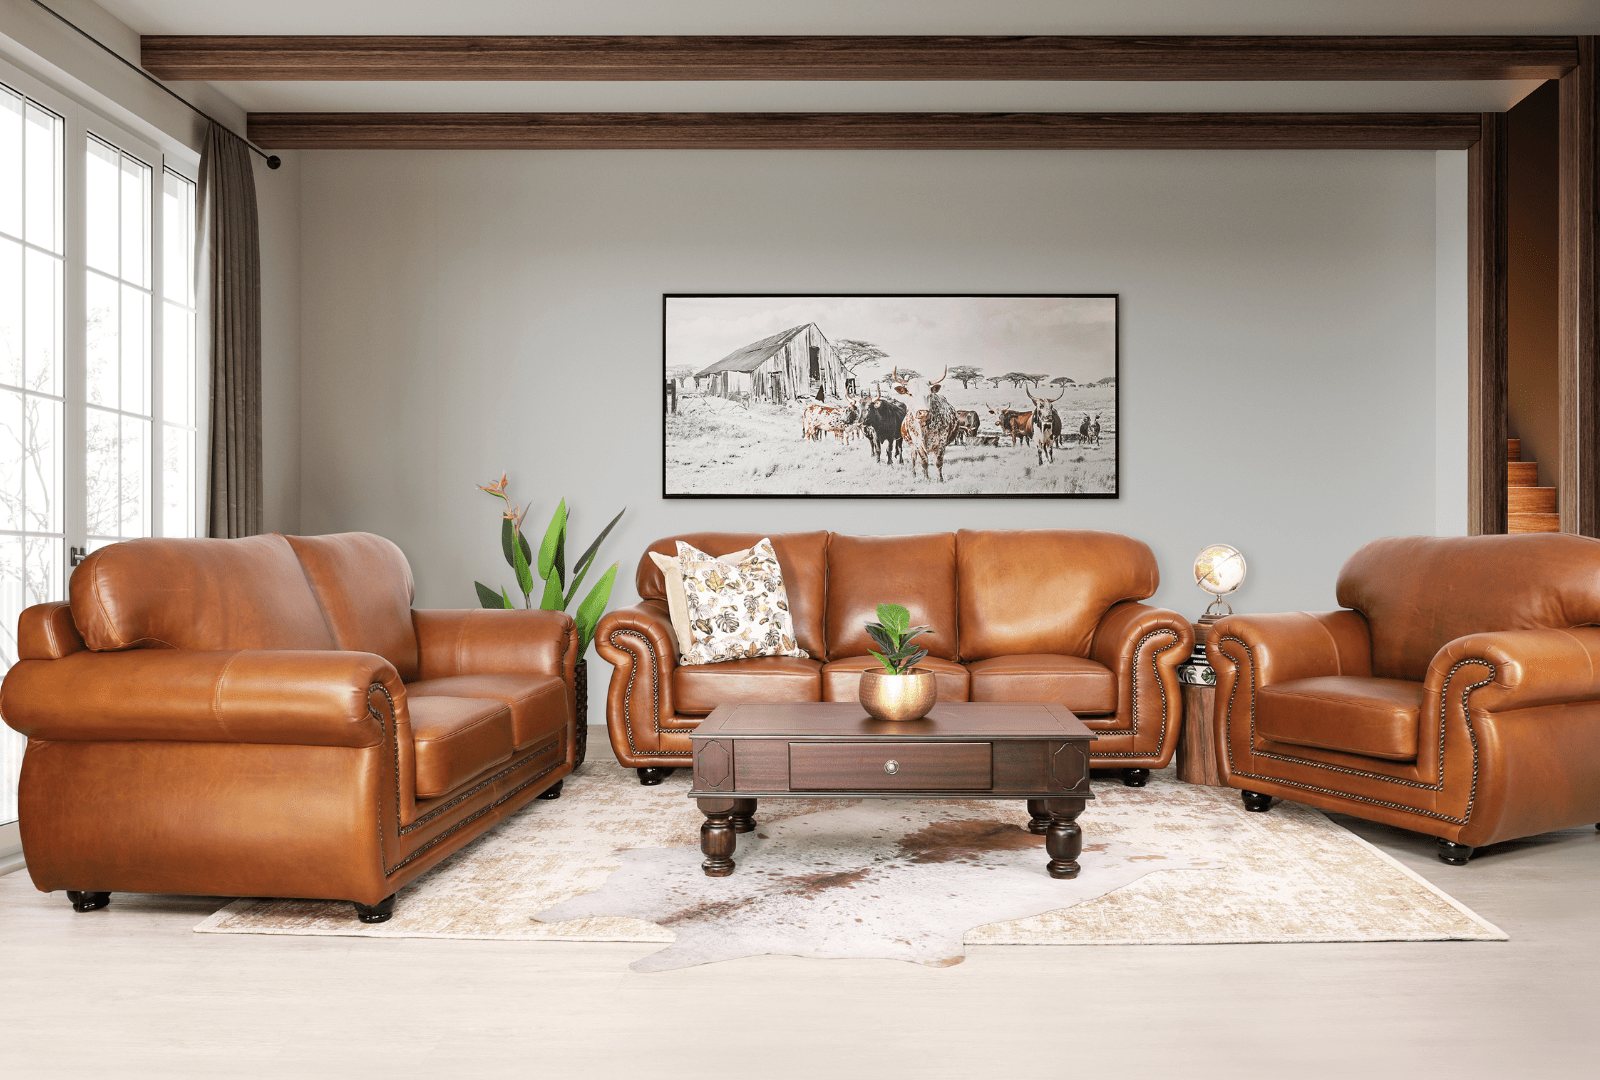 Bringing the Outdoors In: Tips for Creating a Rustic-Themed Home Interior with Furniture and Décor